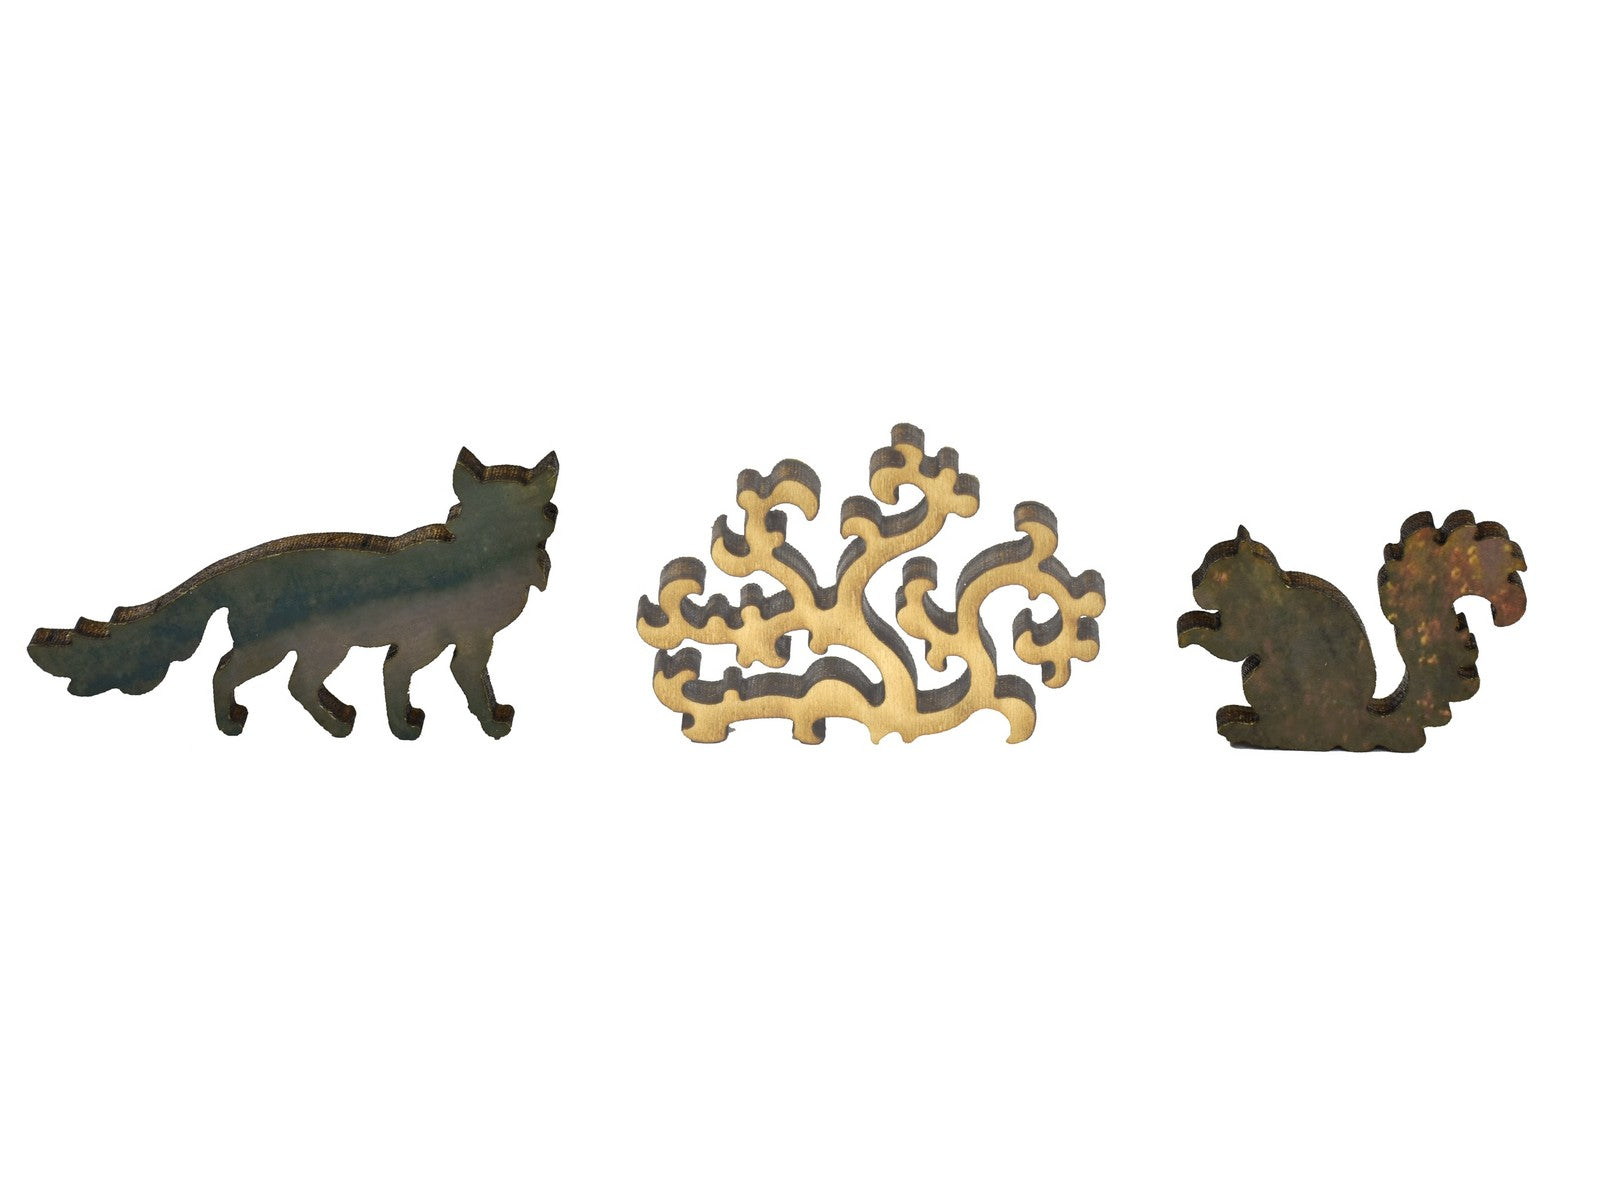 A closeup of pieces in the shape of animals and a bush.